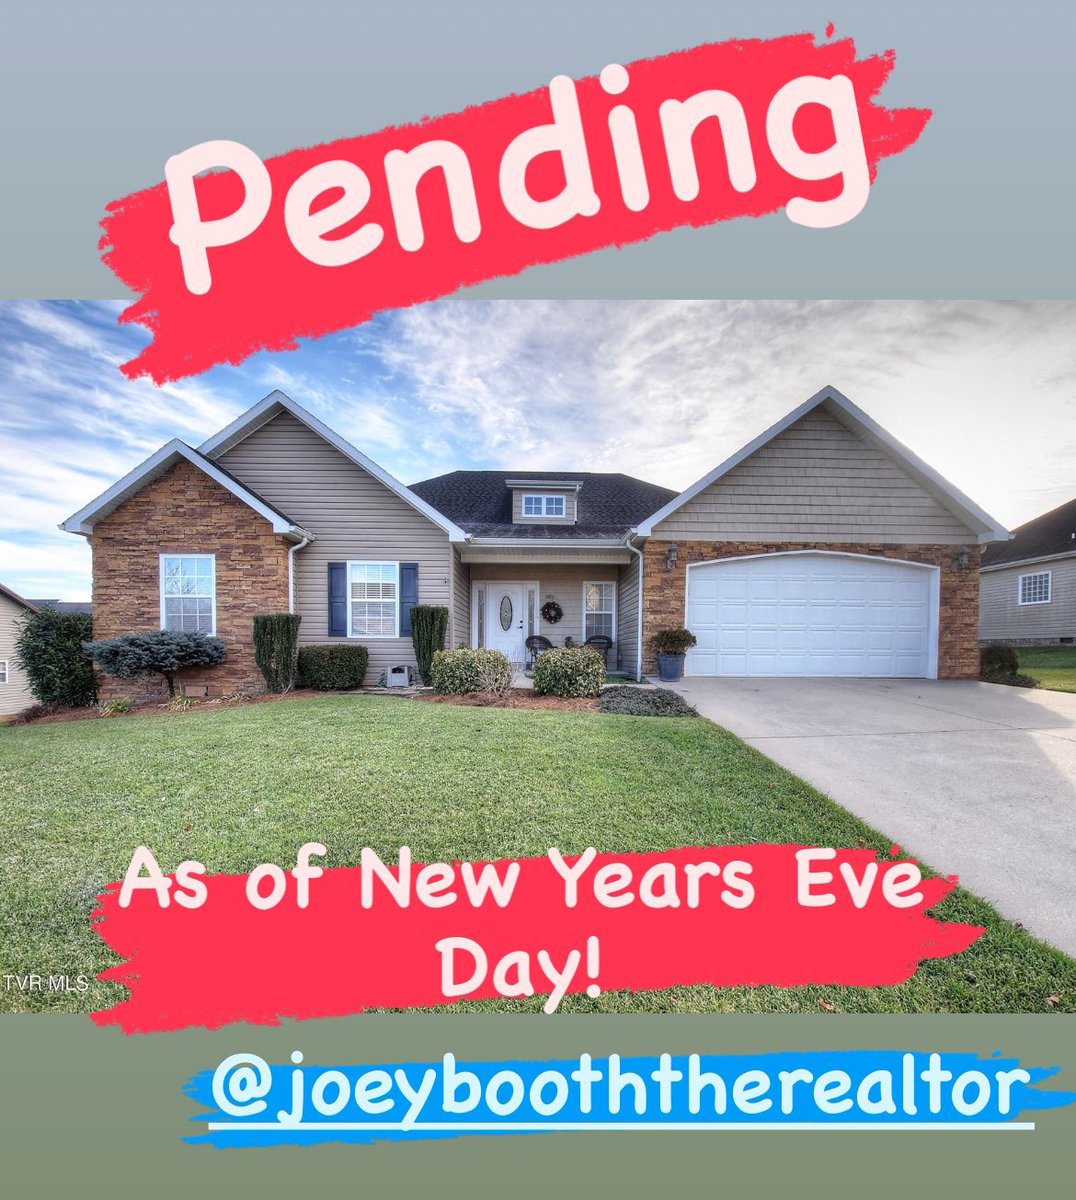 Johnson City Home Pending as of today!  Give me a call!  Joey Booth the Realtor with  #TriCitiesRealtyLLC in Johnson City TN for over 17 years.
 #johnsoncitytn #homeforsale #tricitiestn #joeybooththerealtor #movetojohnsoncitytn #houseforsale #tennessee #movetotn #movetotennessee